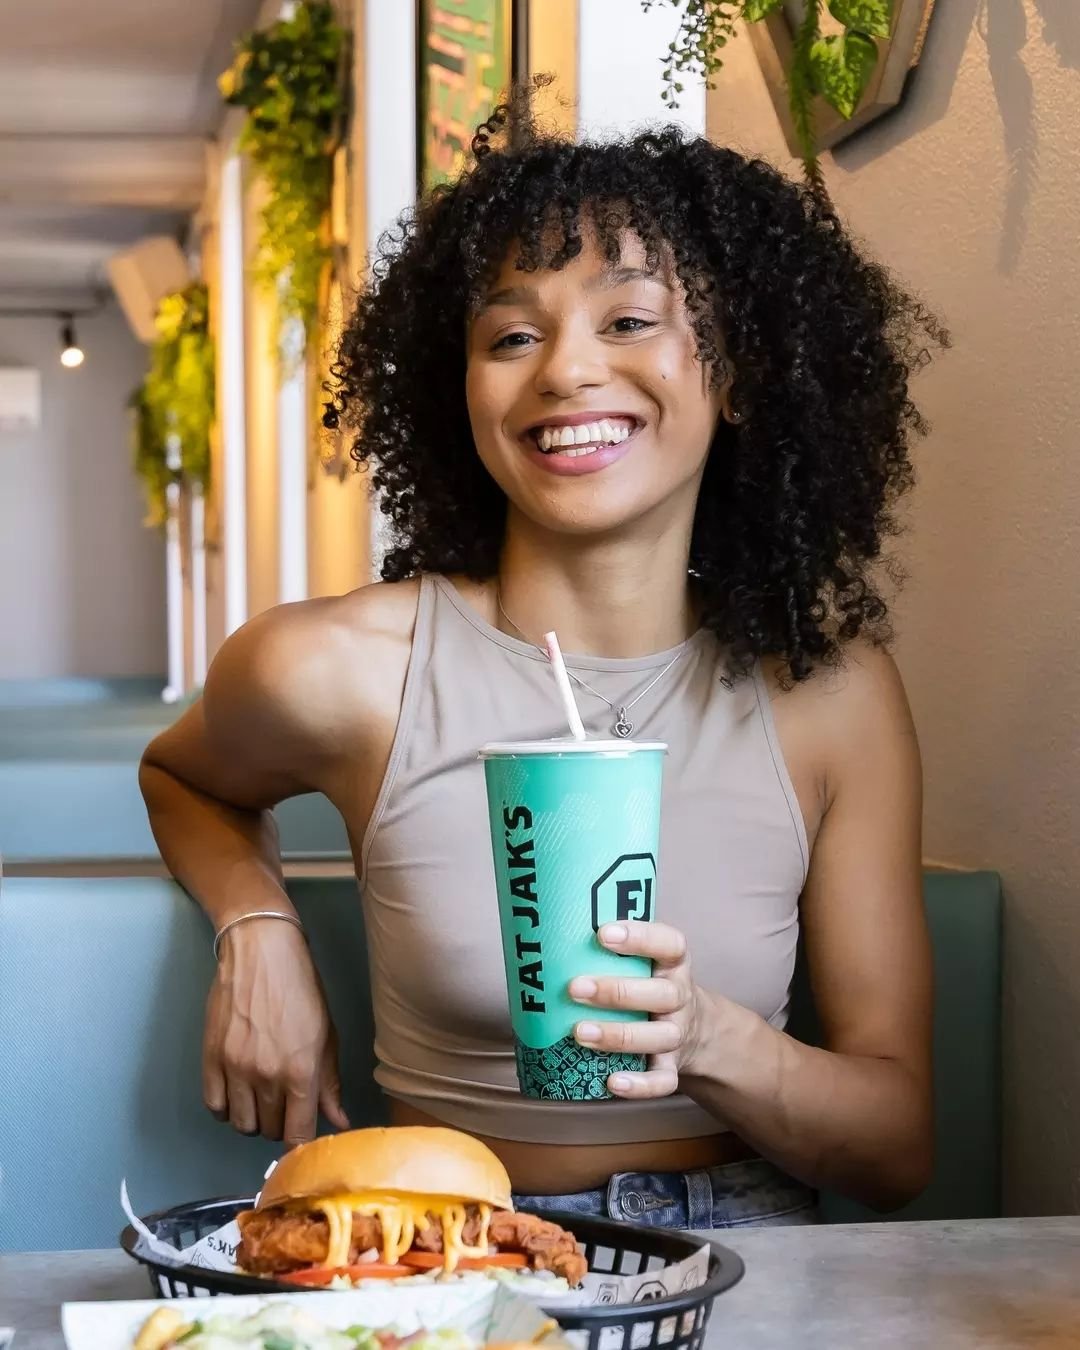 Fresh burger and drink in hand, it's the simple things that make us smile!&nbsp;😁